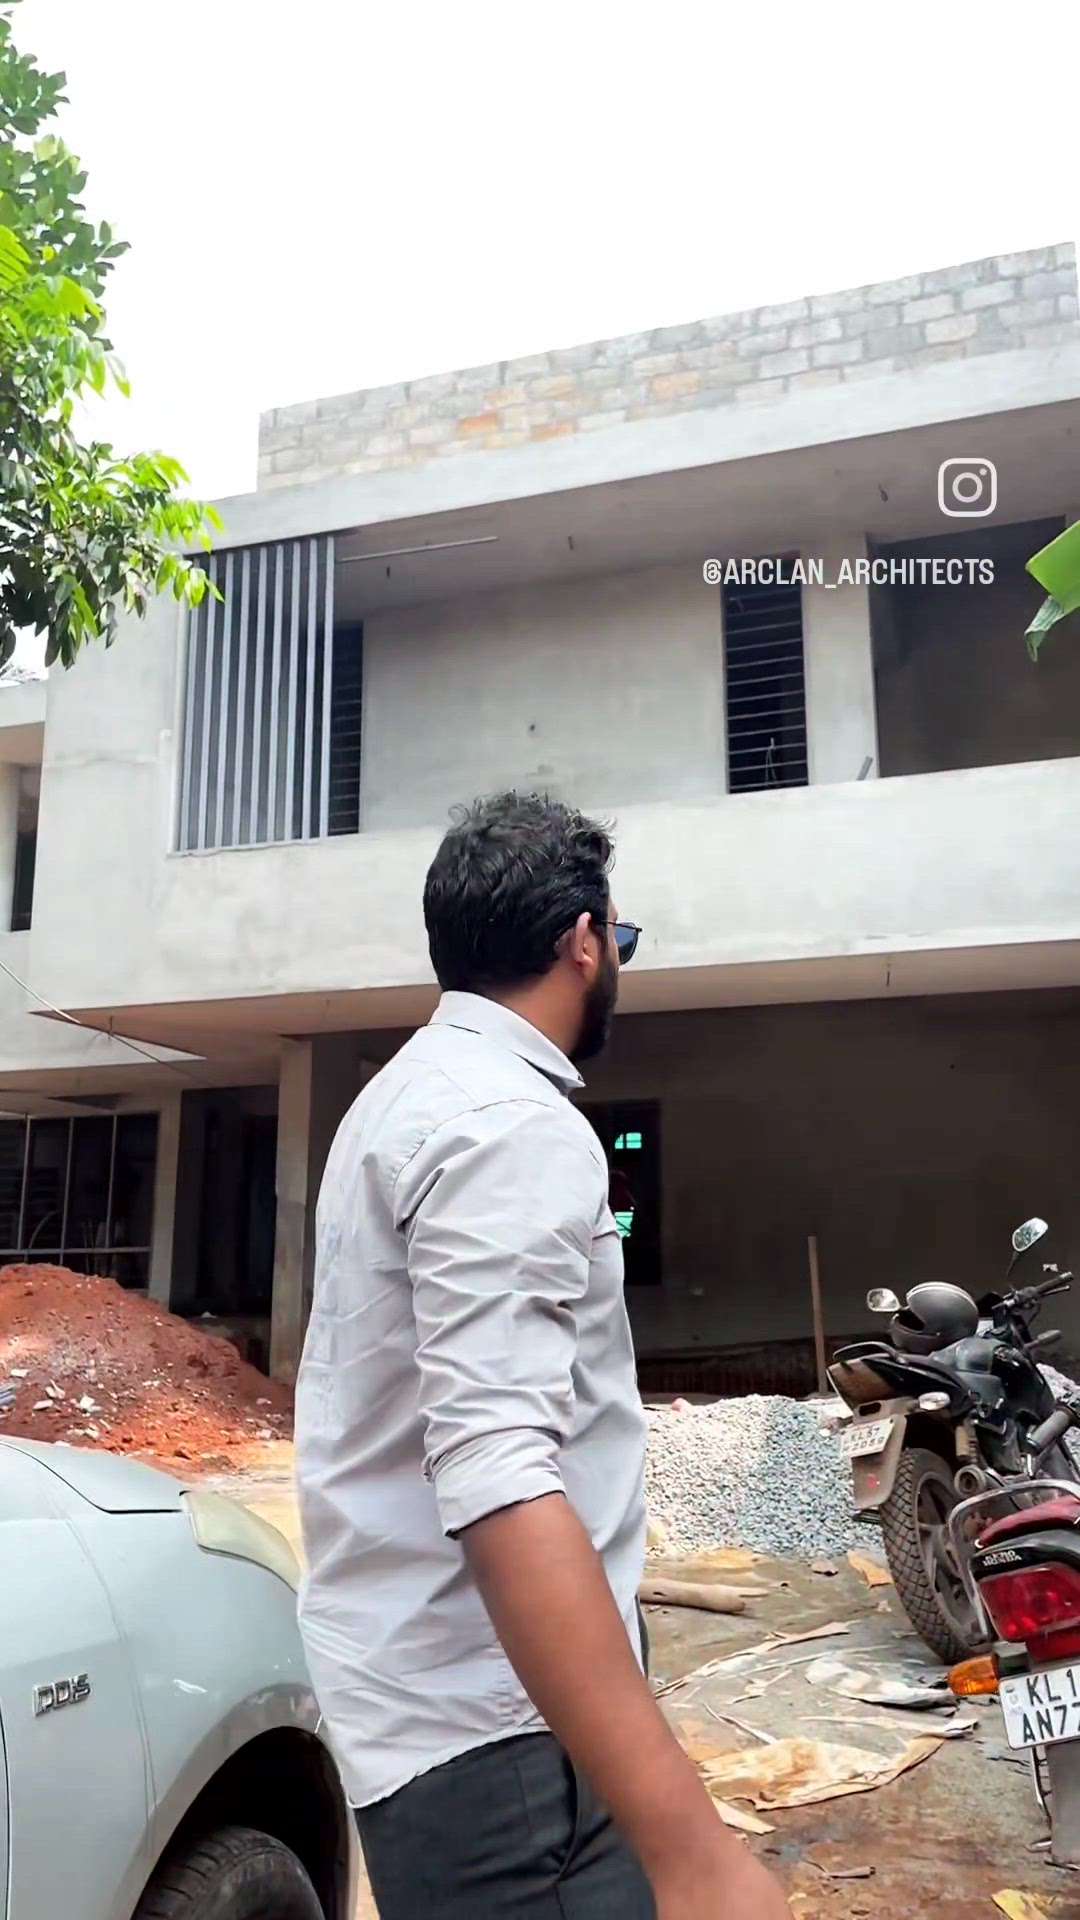 In the making
.
.
Site : Chelavoor, Calicut
Area : 5400

#4bhk #arclanarchitects  #luxuriousdesign #modernhouses #ContemporaryDesigns #architecturedesigns #ElevationDesign